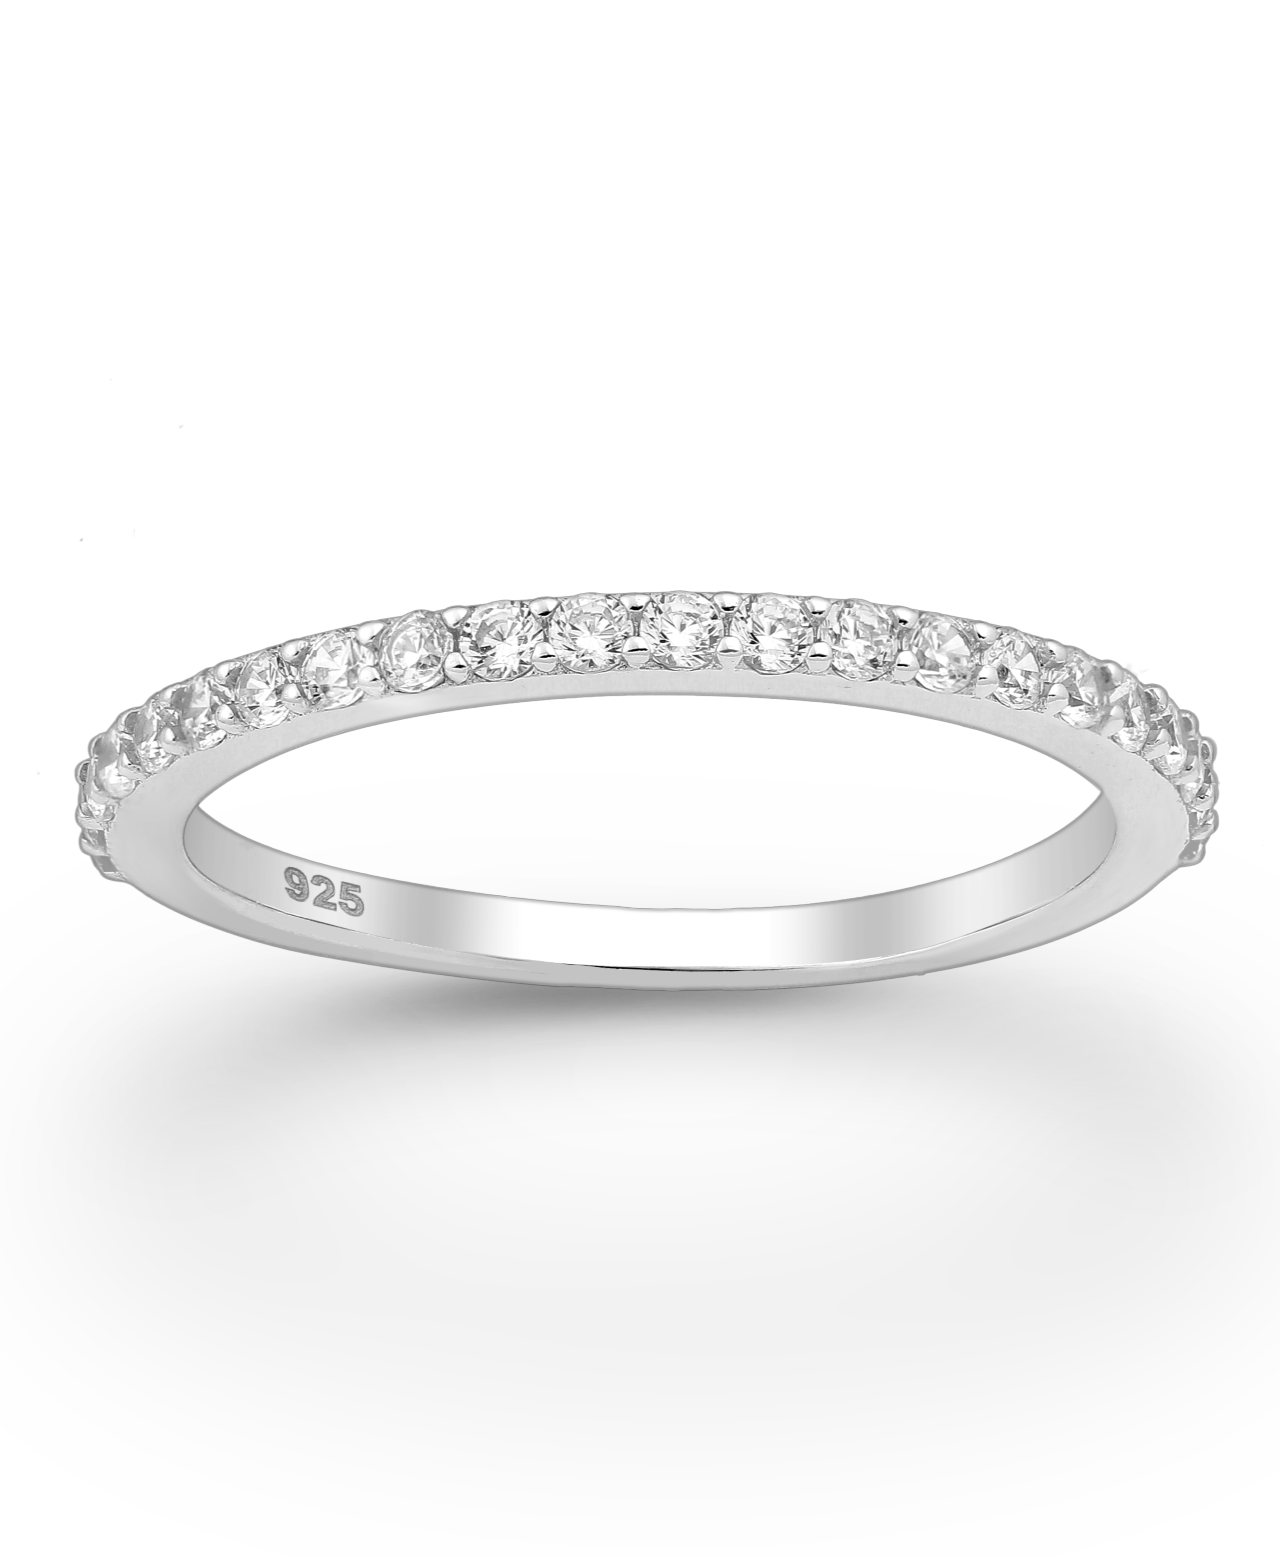 Sterling Silver Stackable Band Ring with CZ Simulated Diamonds